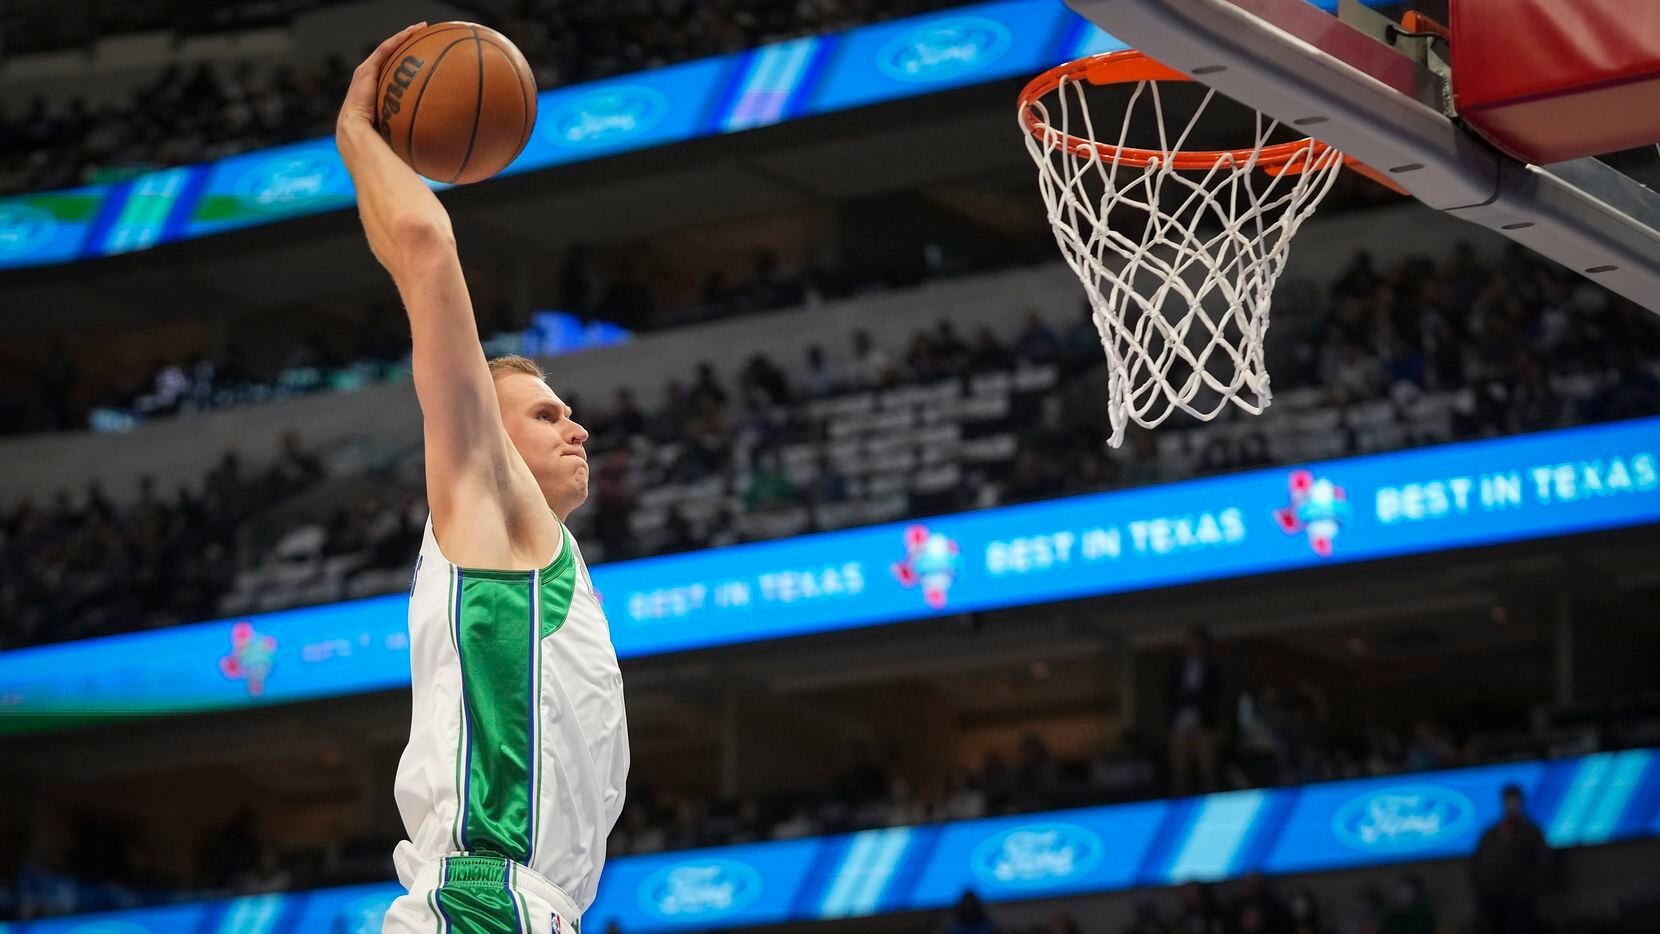 Dallas Mavericks center Kristaps Porzingis (6) dunks during the first half of an NBA basketball game against the Boston Celtics at American Airlines Center on Saturday, Nov. 6, 2021, in Dallas.